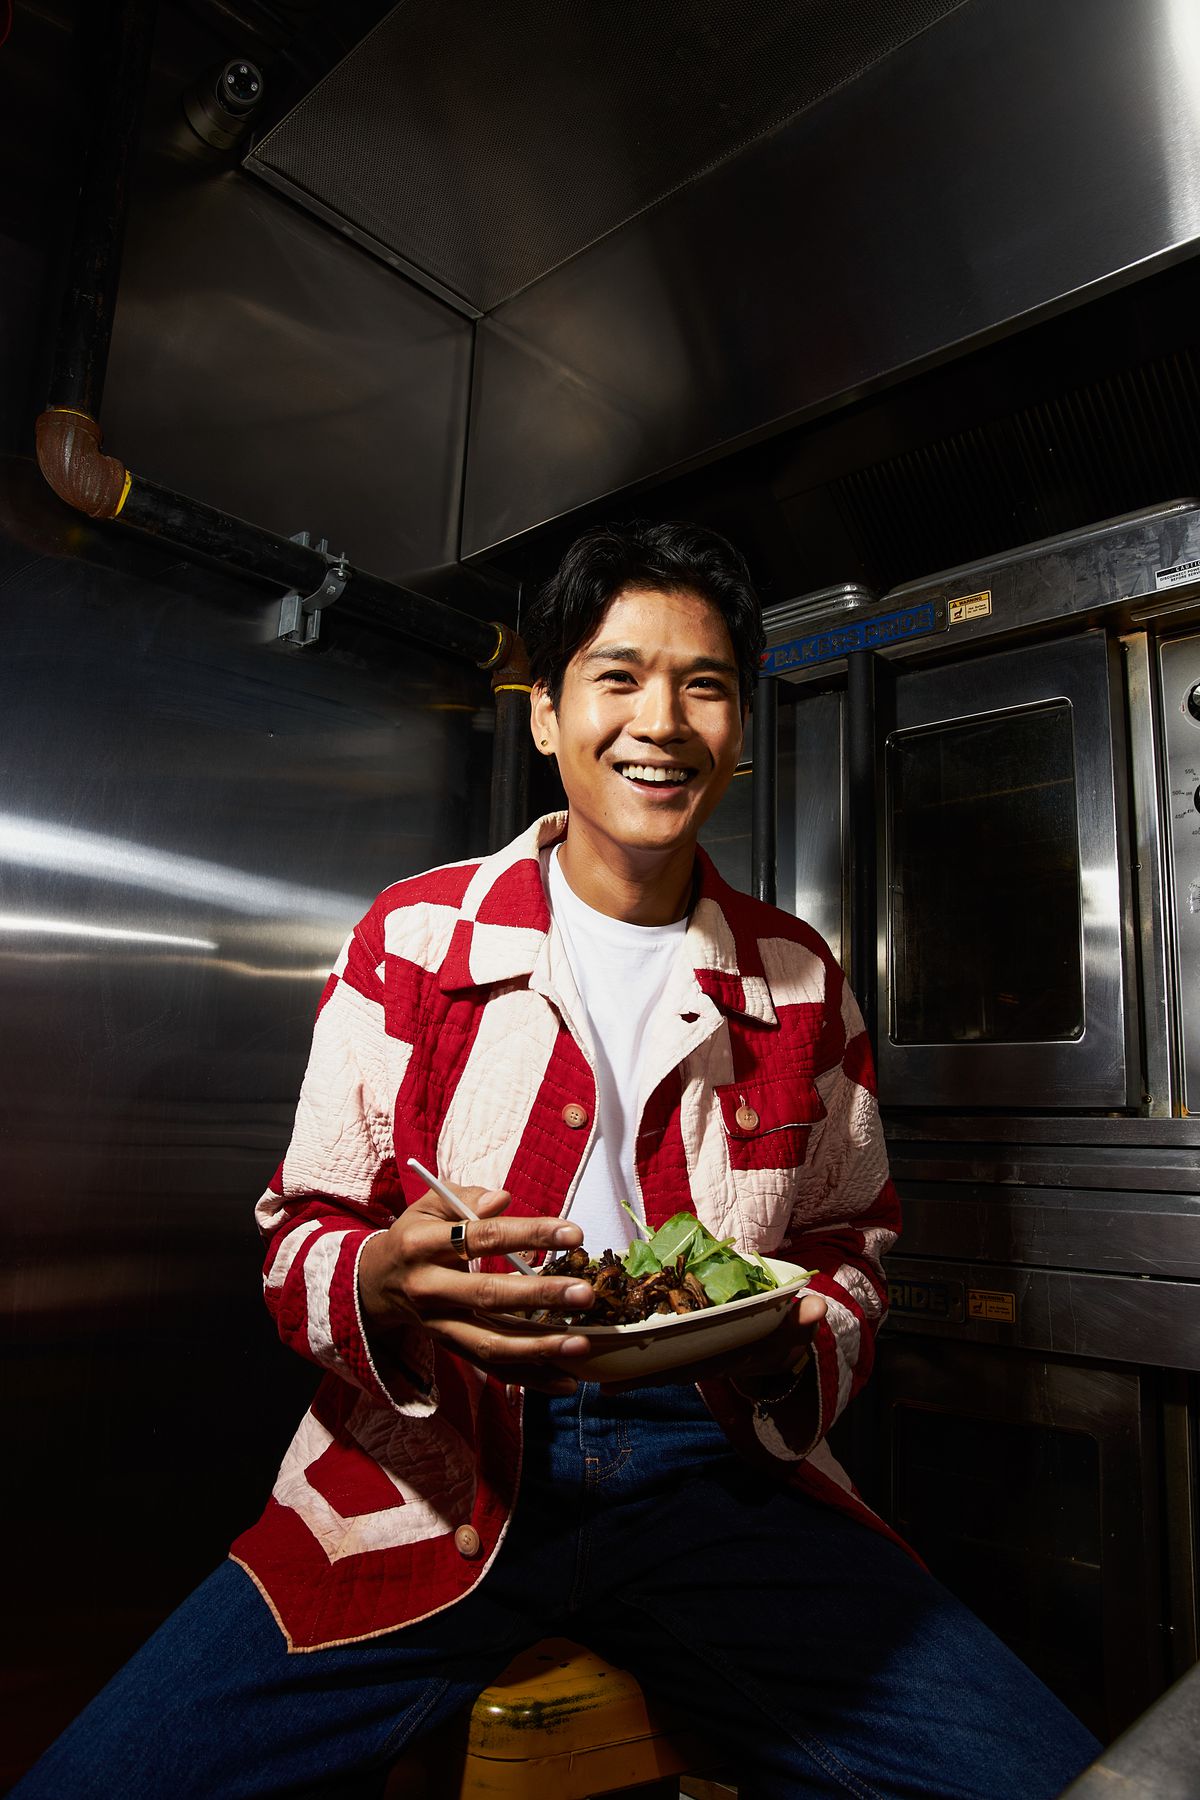 Woldy Reyes, a Filipino chef known for his Woldy Kusina pop-up in New York City, stands in an industrial kitchen in a red and white outfit.